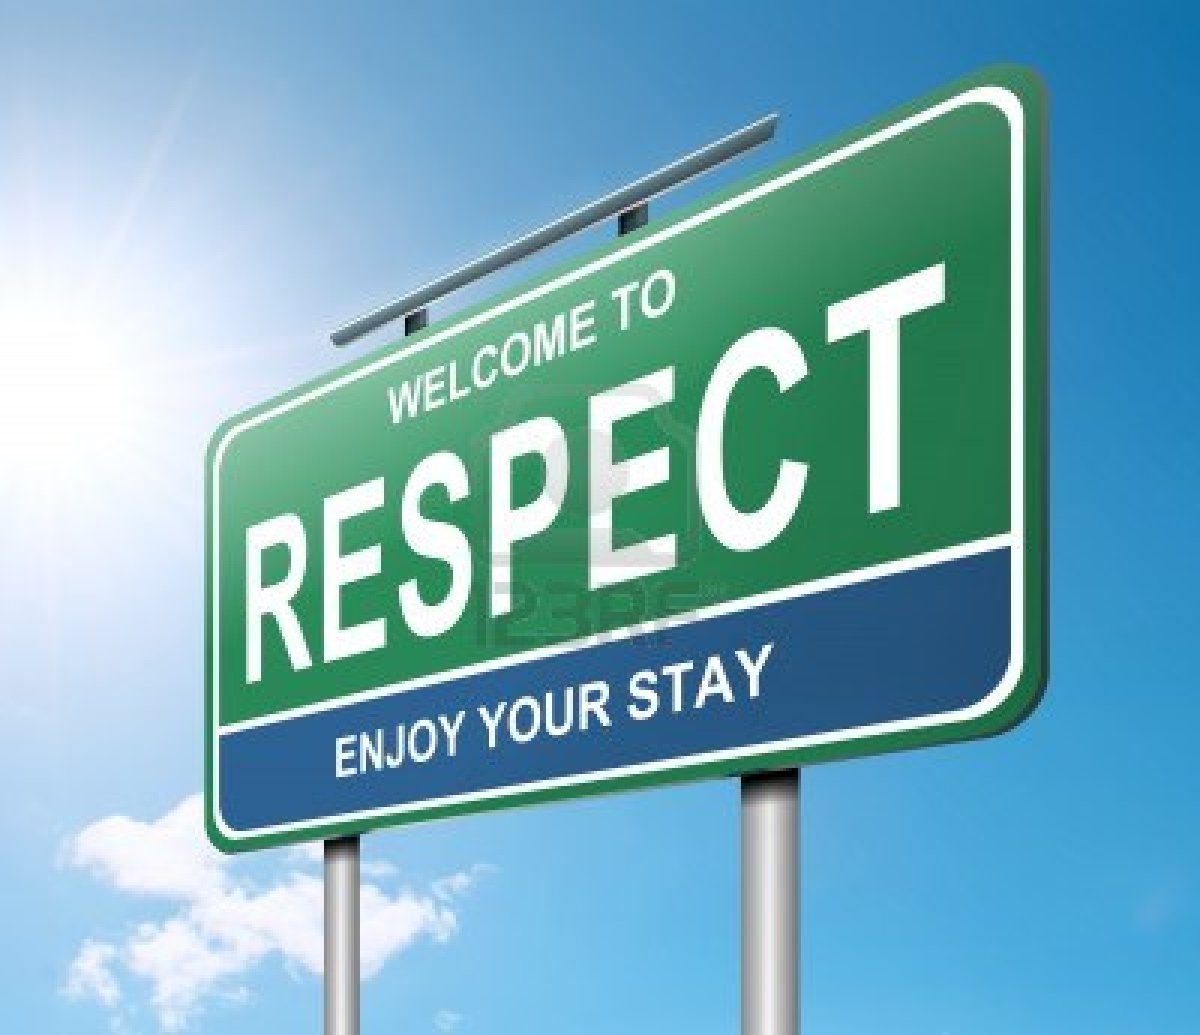 The Value of Respect